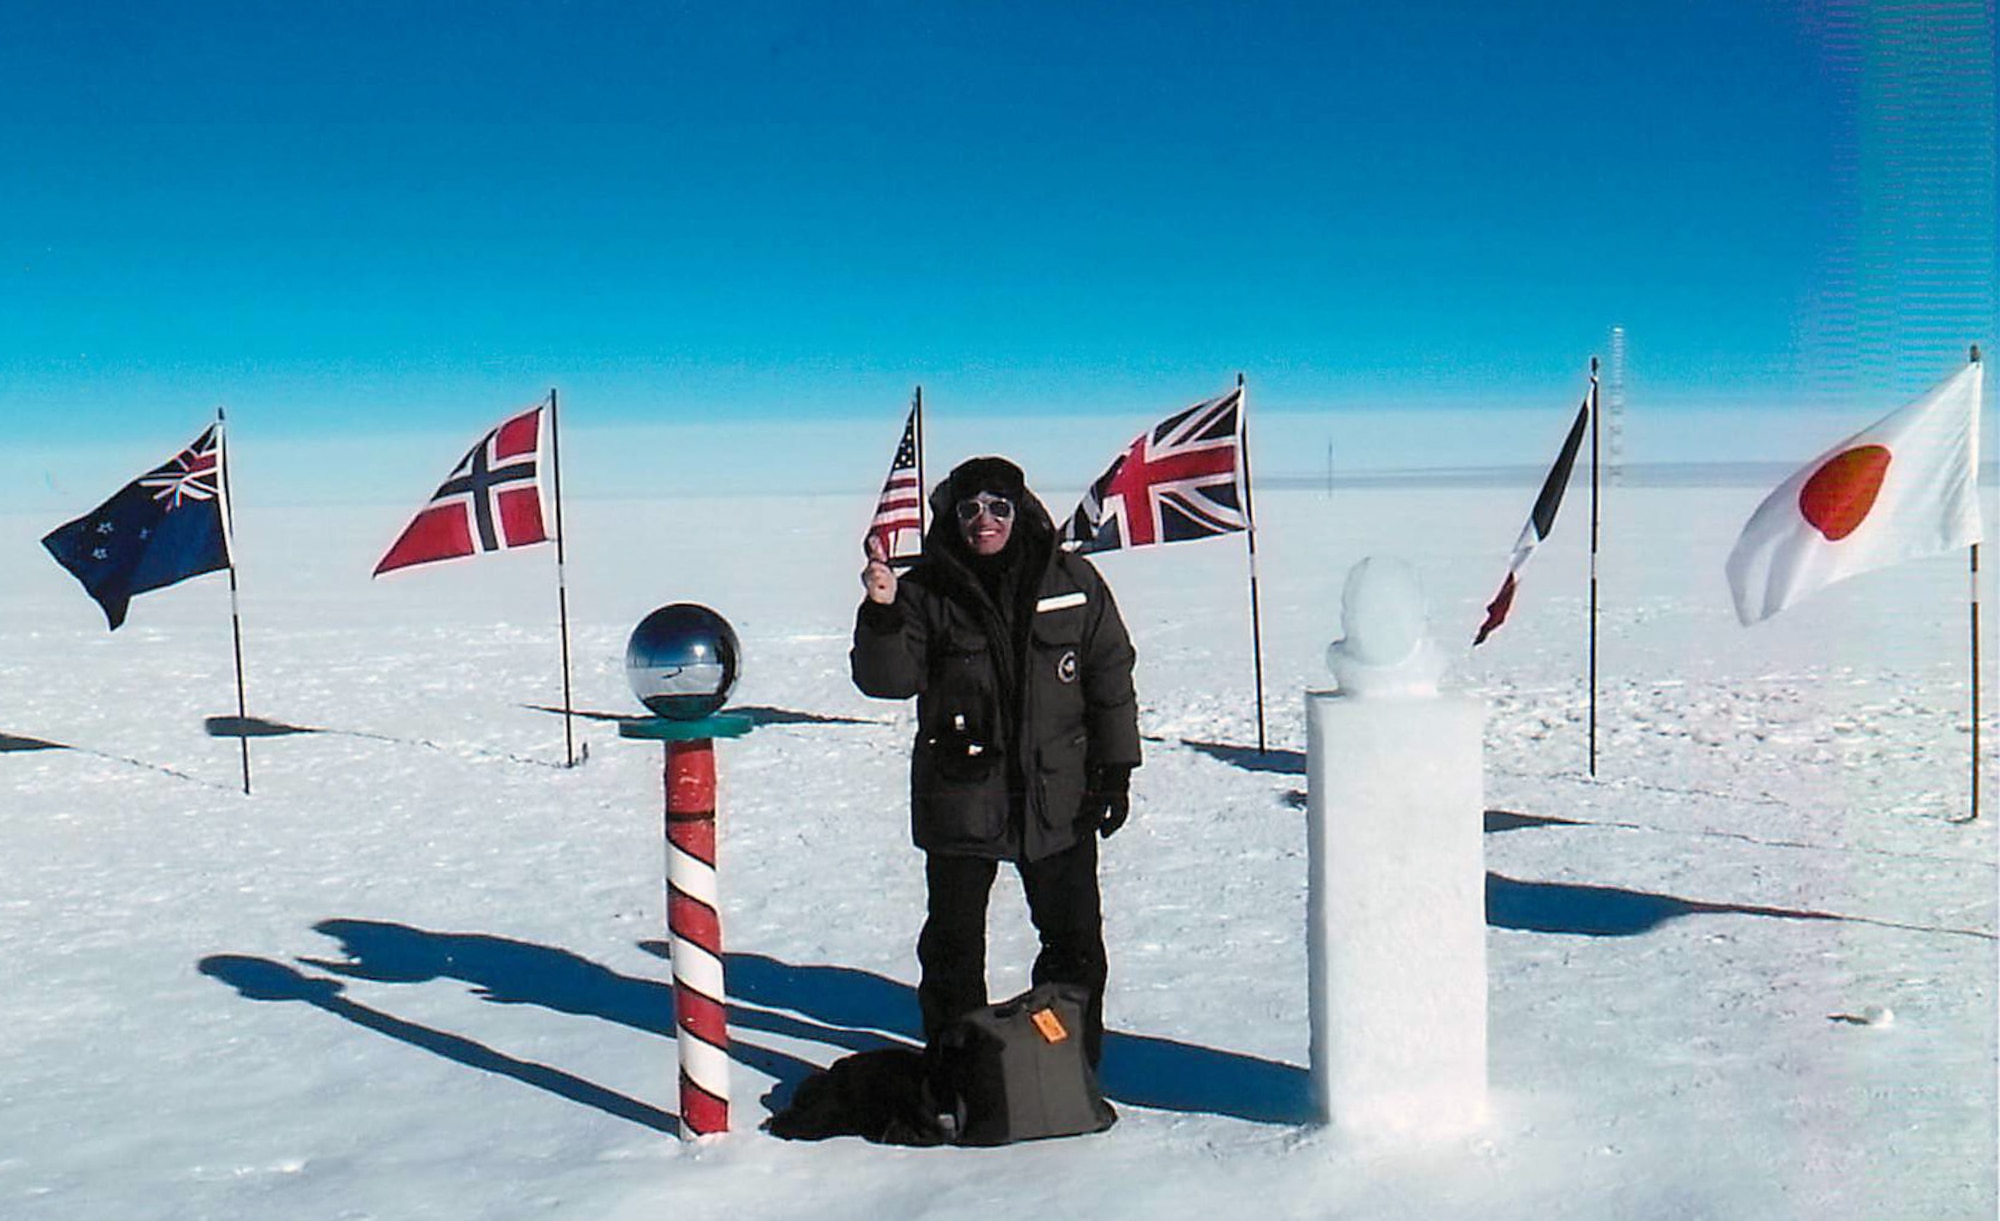 Master Sgt. Scott Terra, 728th Airlift Squadron, Joint Base Lewis-McChord, Wash.,  stands in between the ceremonial South Pole and an ice sculpture of Roald Amundsen, the first human to reach the geographic South Pole.  Terra, a loadmaster, served in an administrative position supporting the 109th Airlift Wing, New York Air National Guard.  His position was part of an effort to expose C-17 Airmen to the LC-130 mission in Operation Deep Freeze. (Courtesy photo)